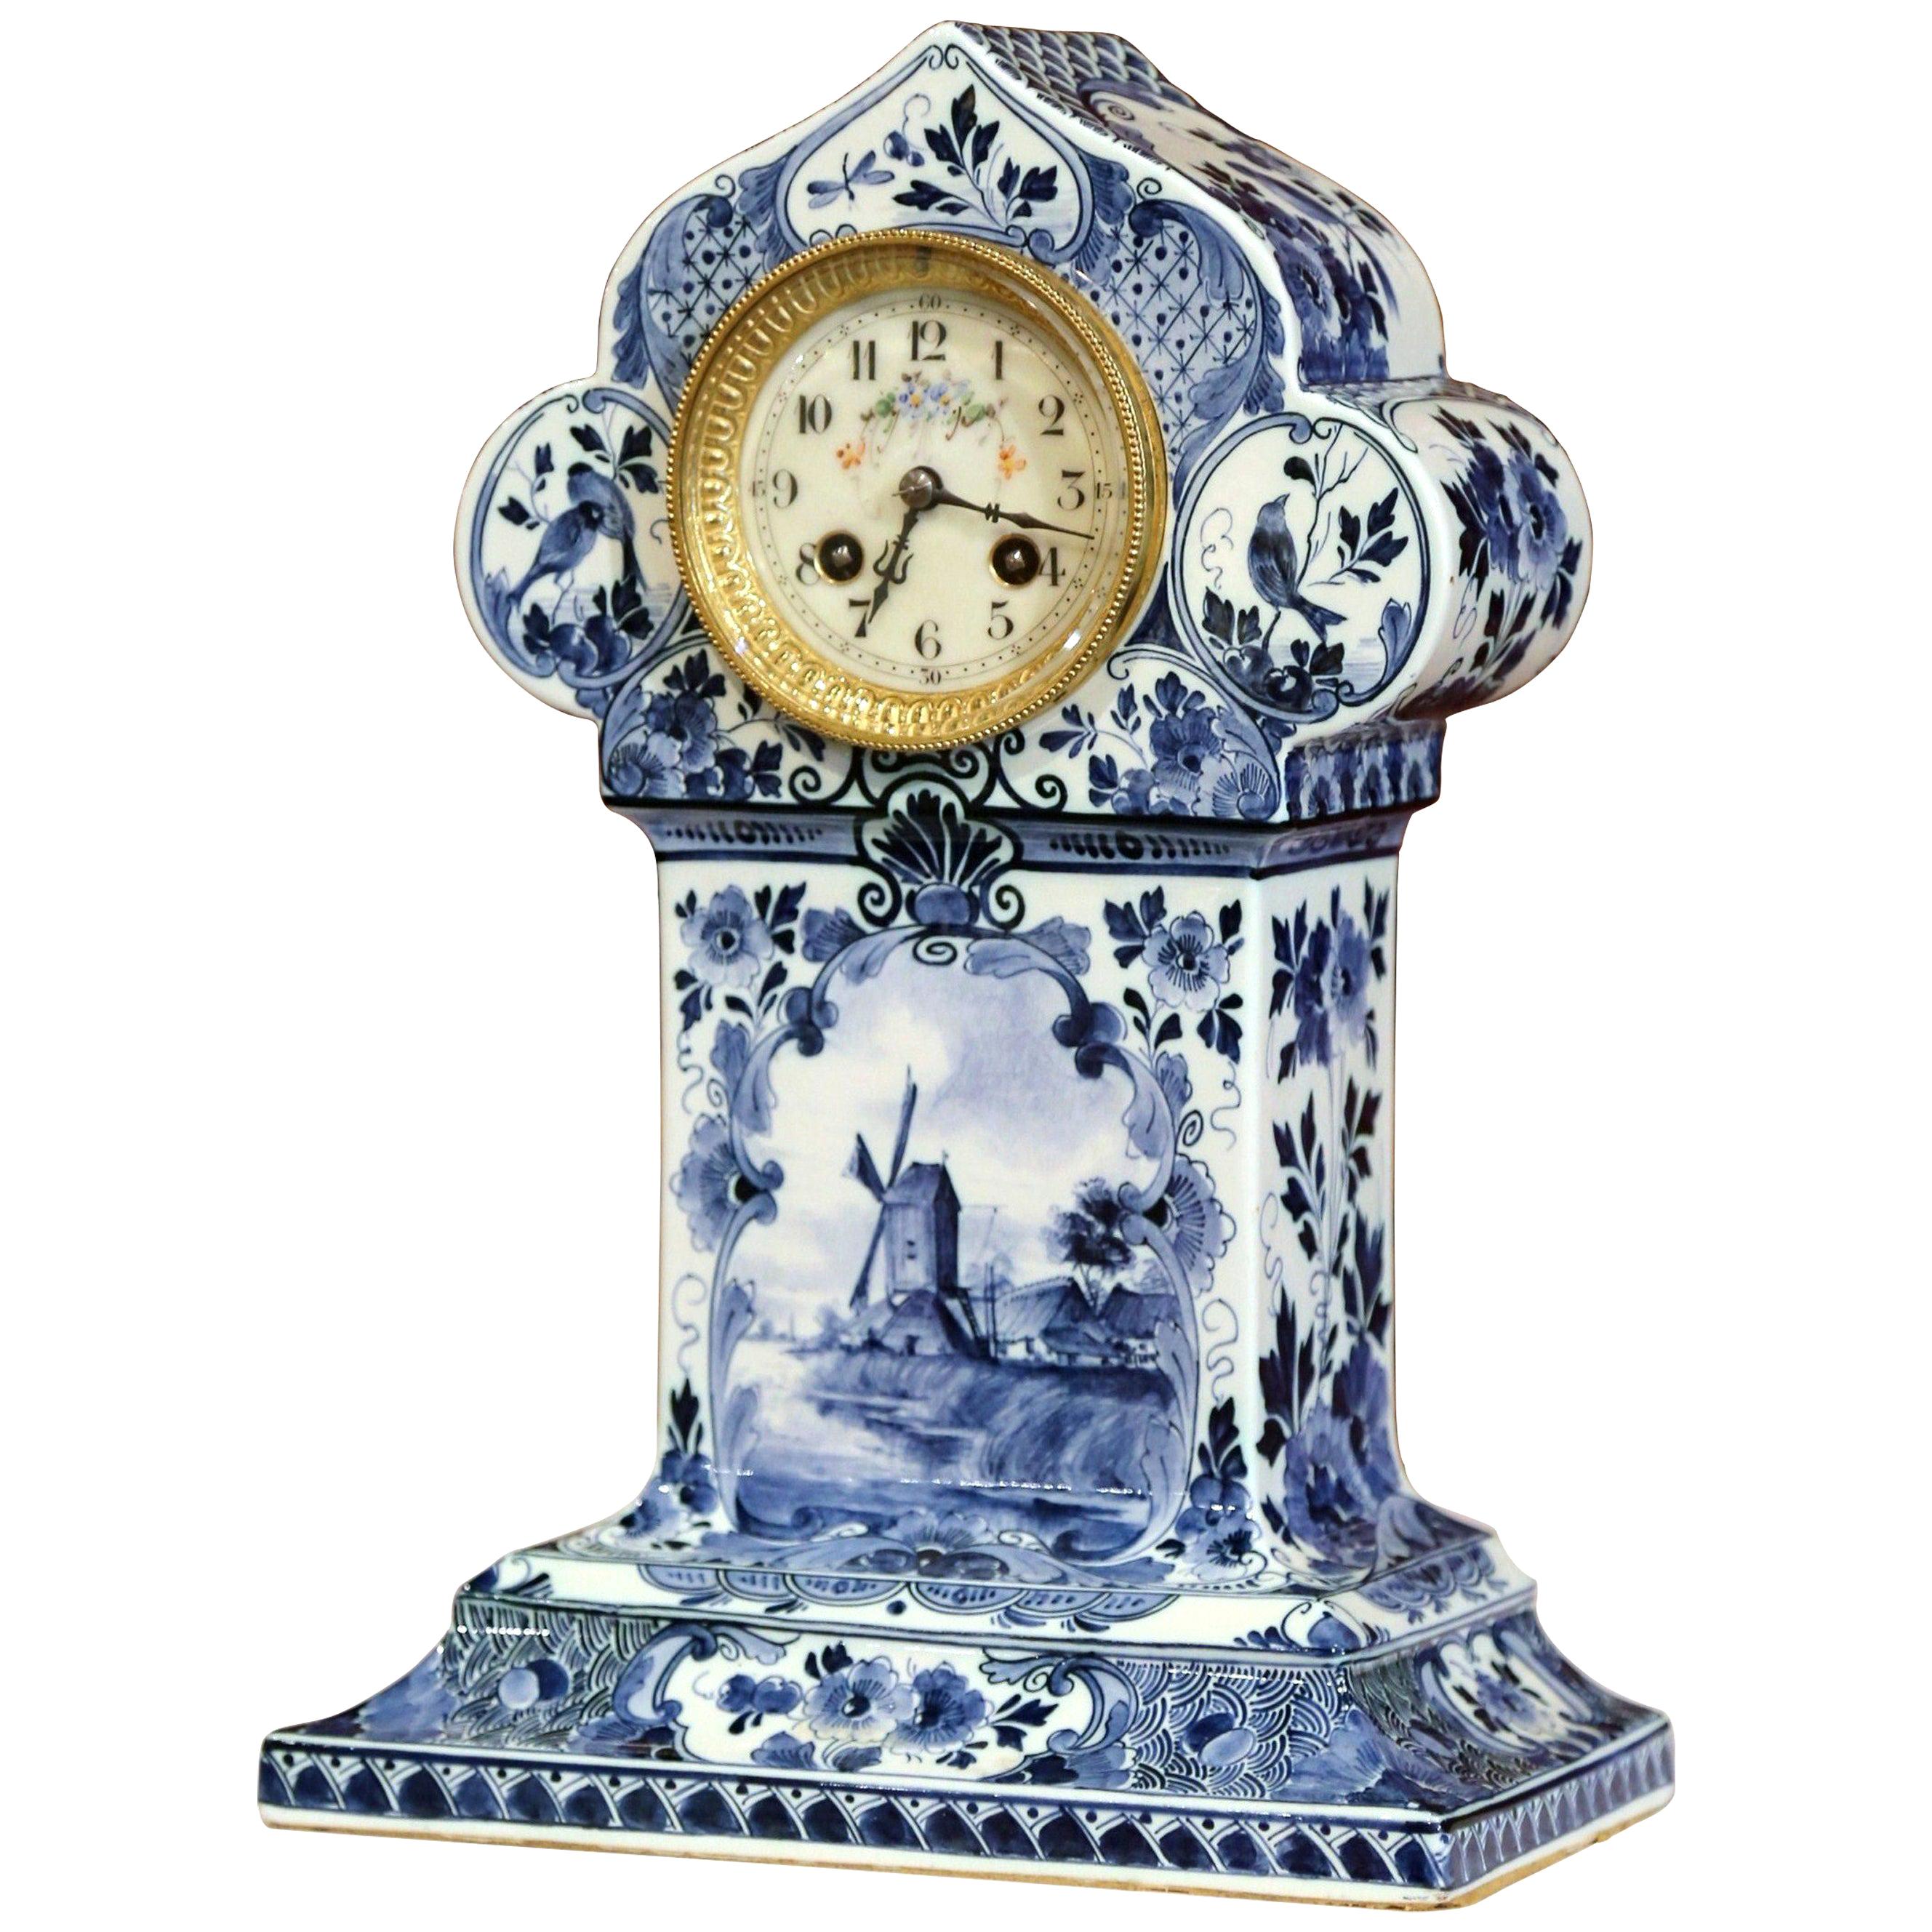 Early 20th Century Dutch Hand Painted Blue and White Faience Delft Mantel Clock